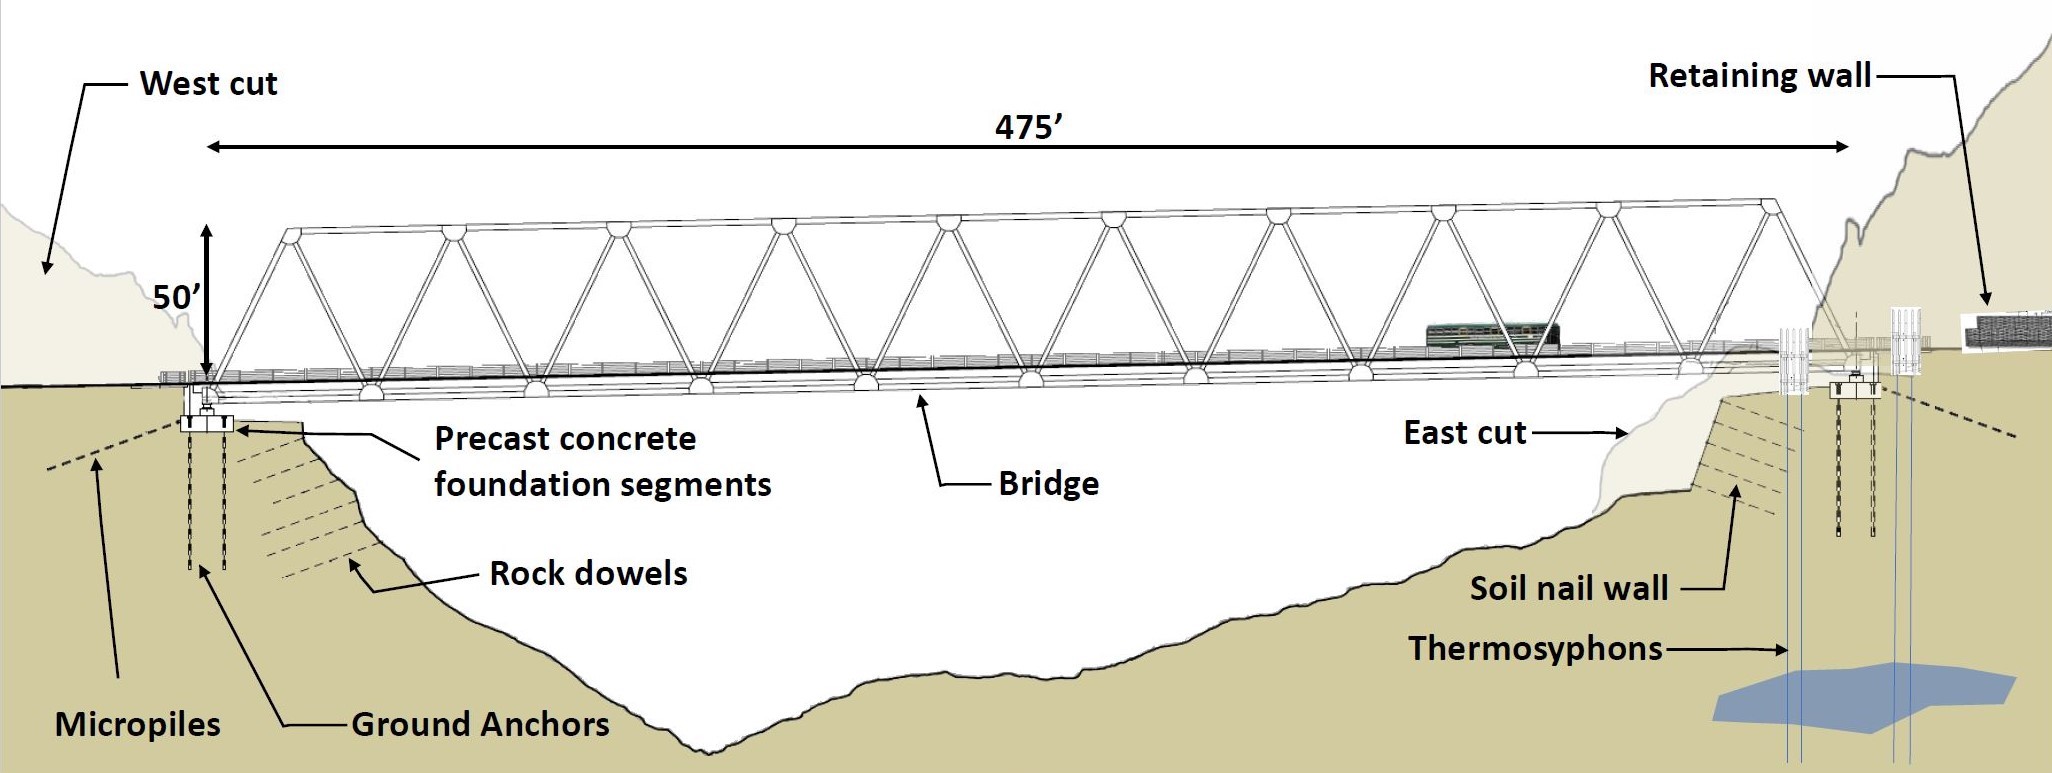 A diagram of a 475-foot bridge with many features labeled, including: retaining walls, micropiles, ground anchors, thermosyphons, and east and west excavation cuts into surrounding rock.